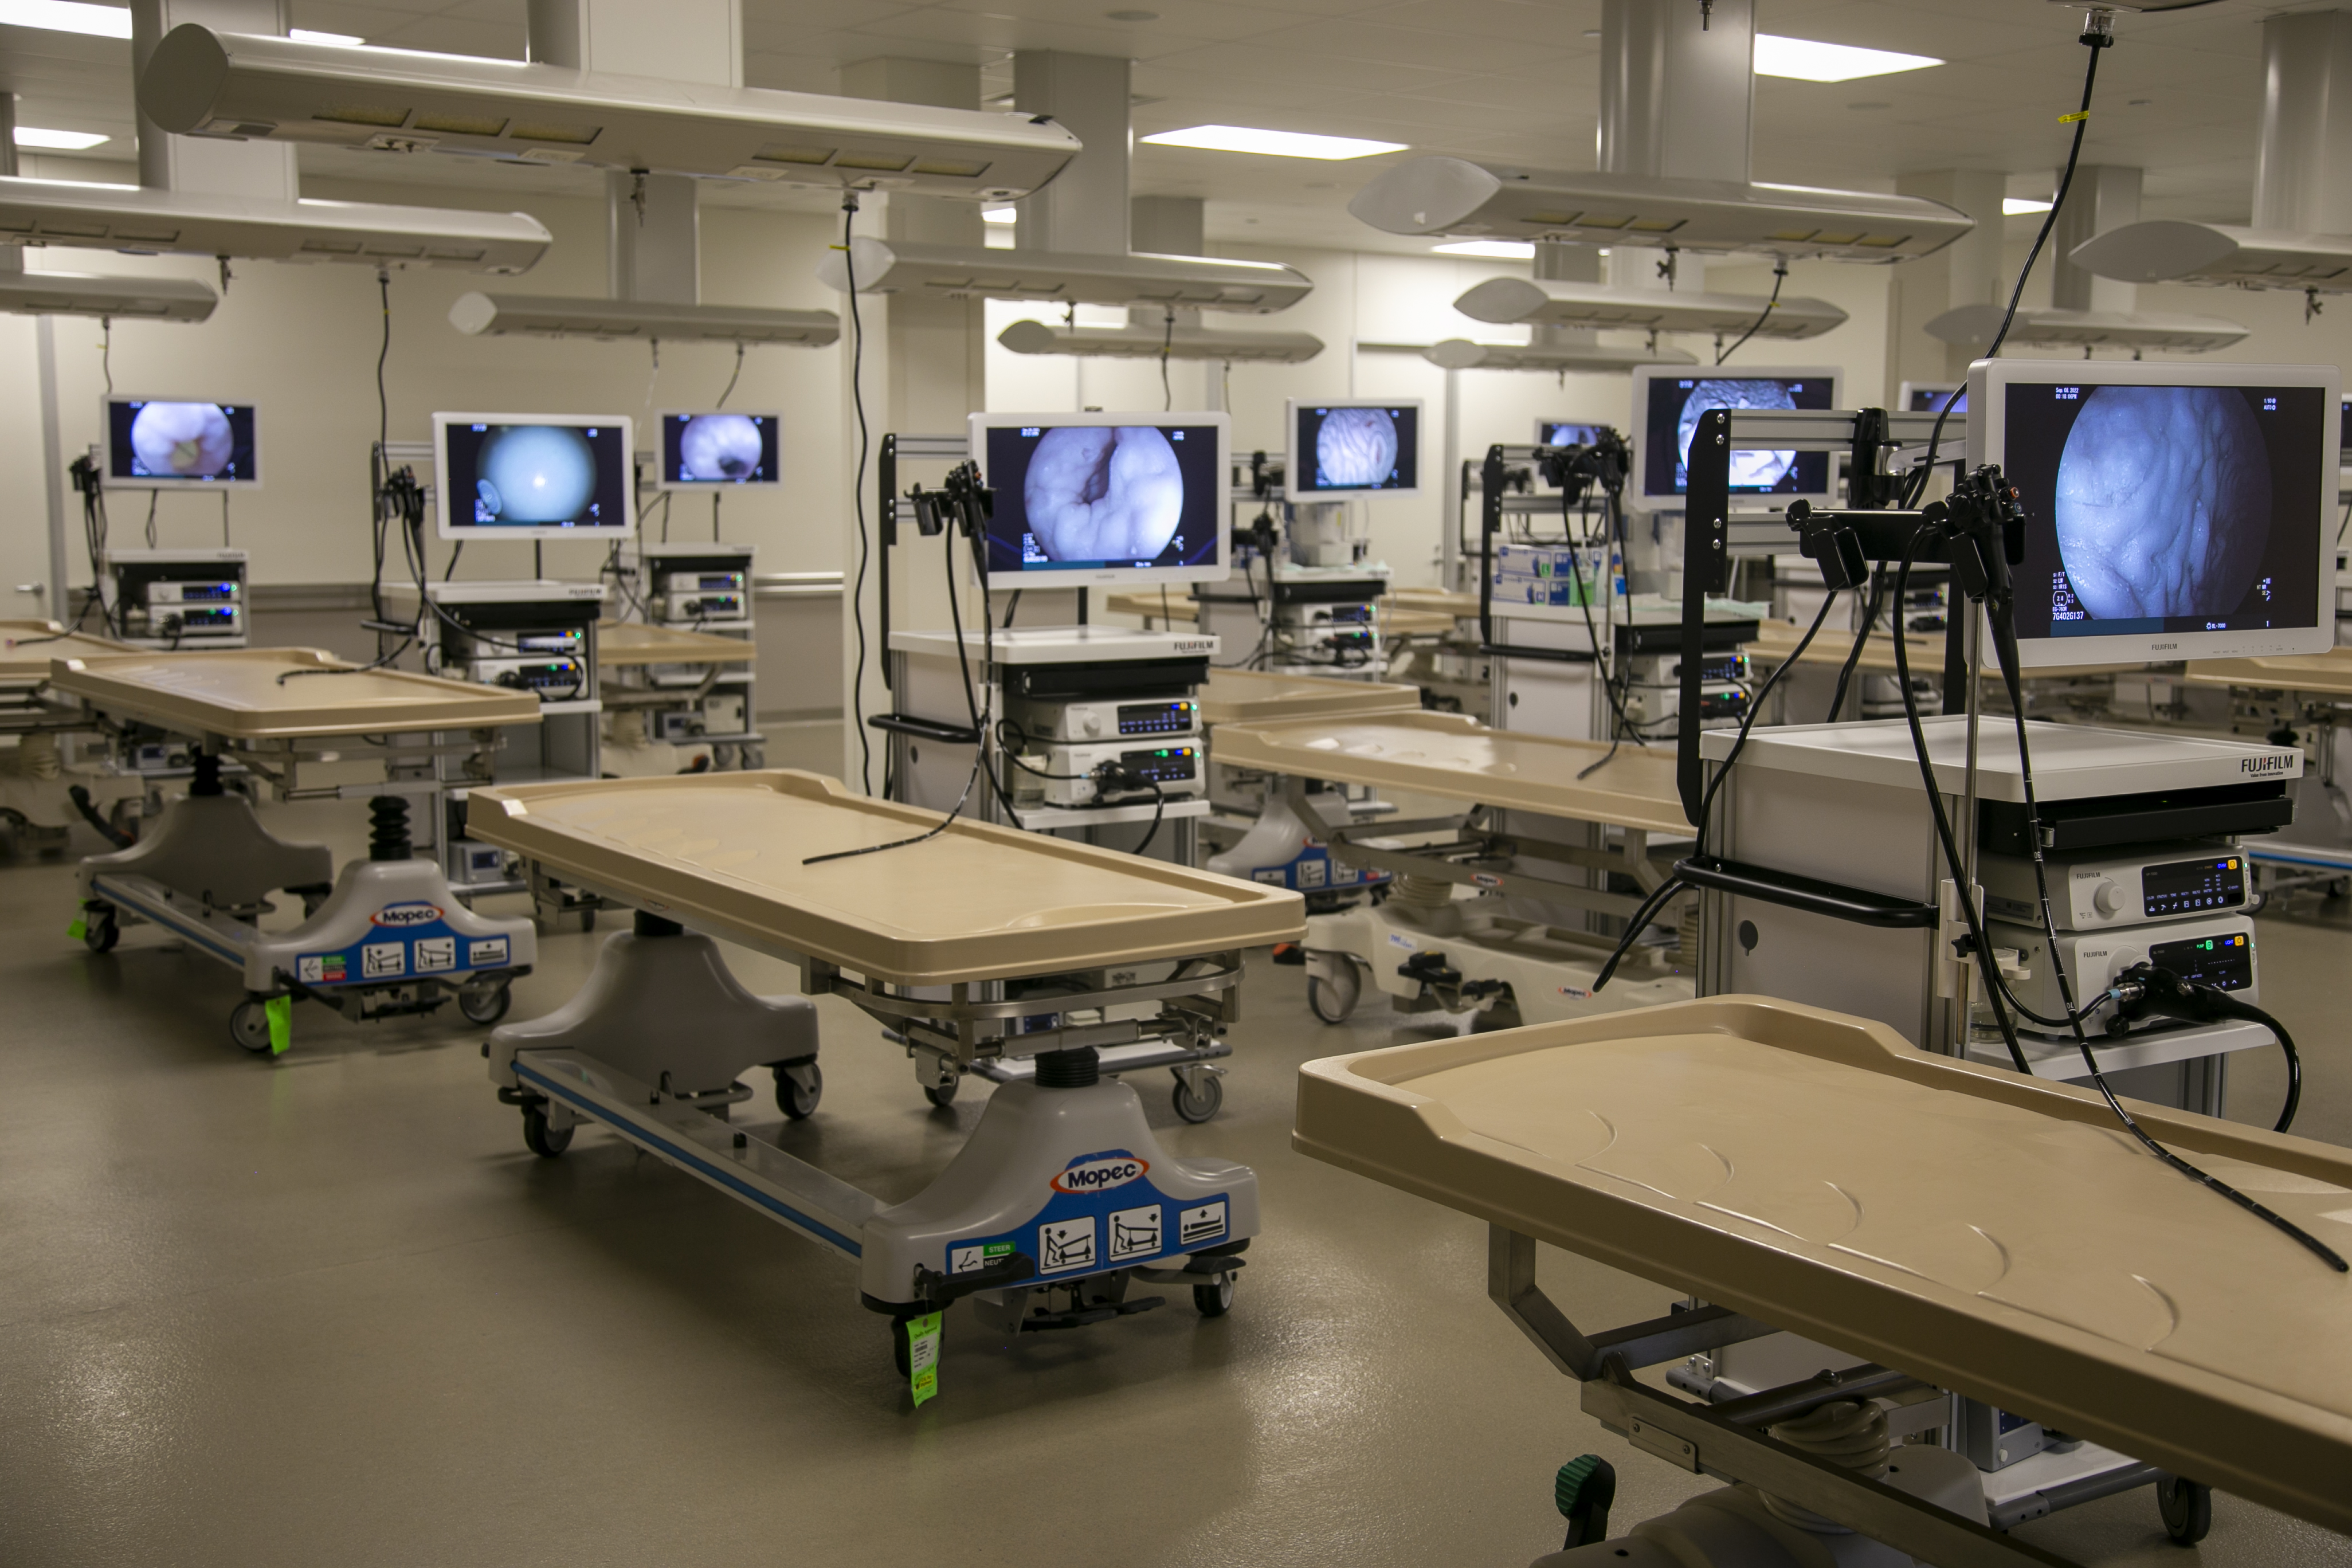 New Fujifilm Technology Installed at ASGE's Institute for Training and Technology Advanced Bioskills Laboratory